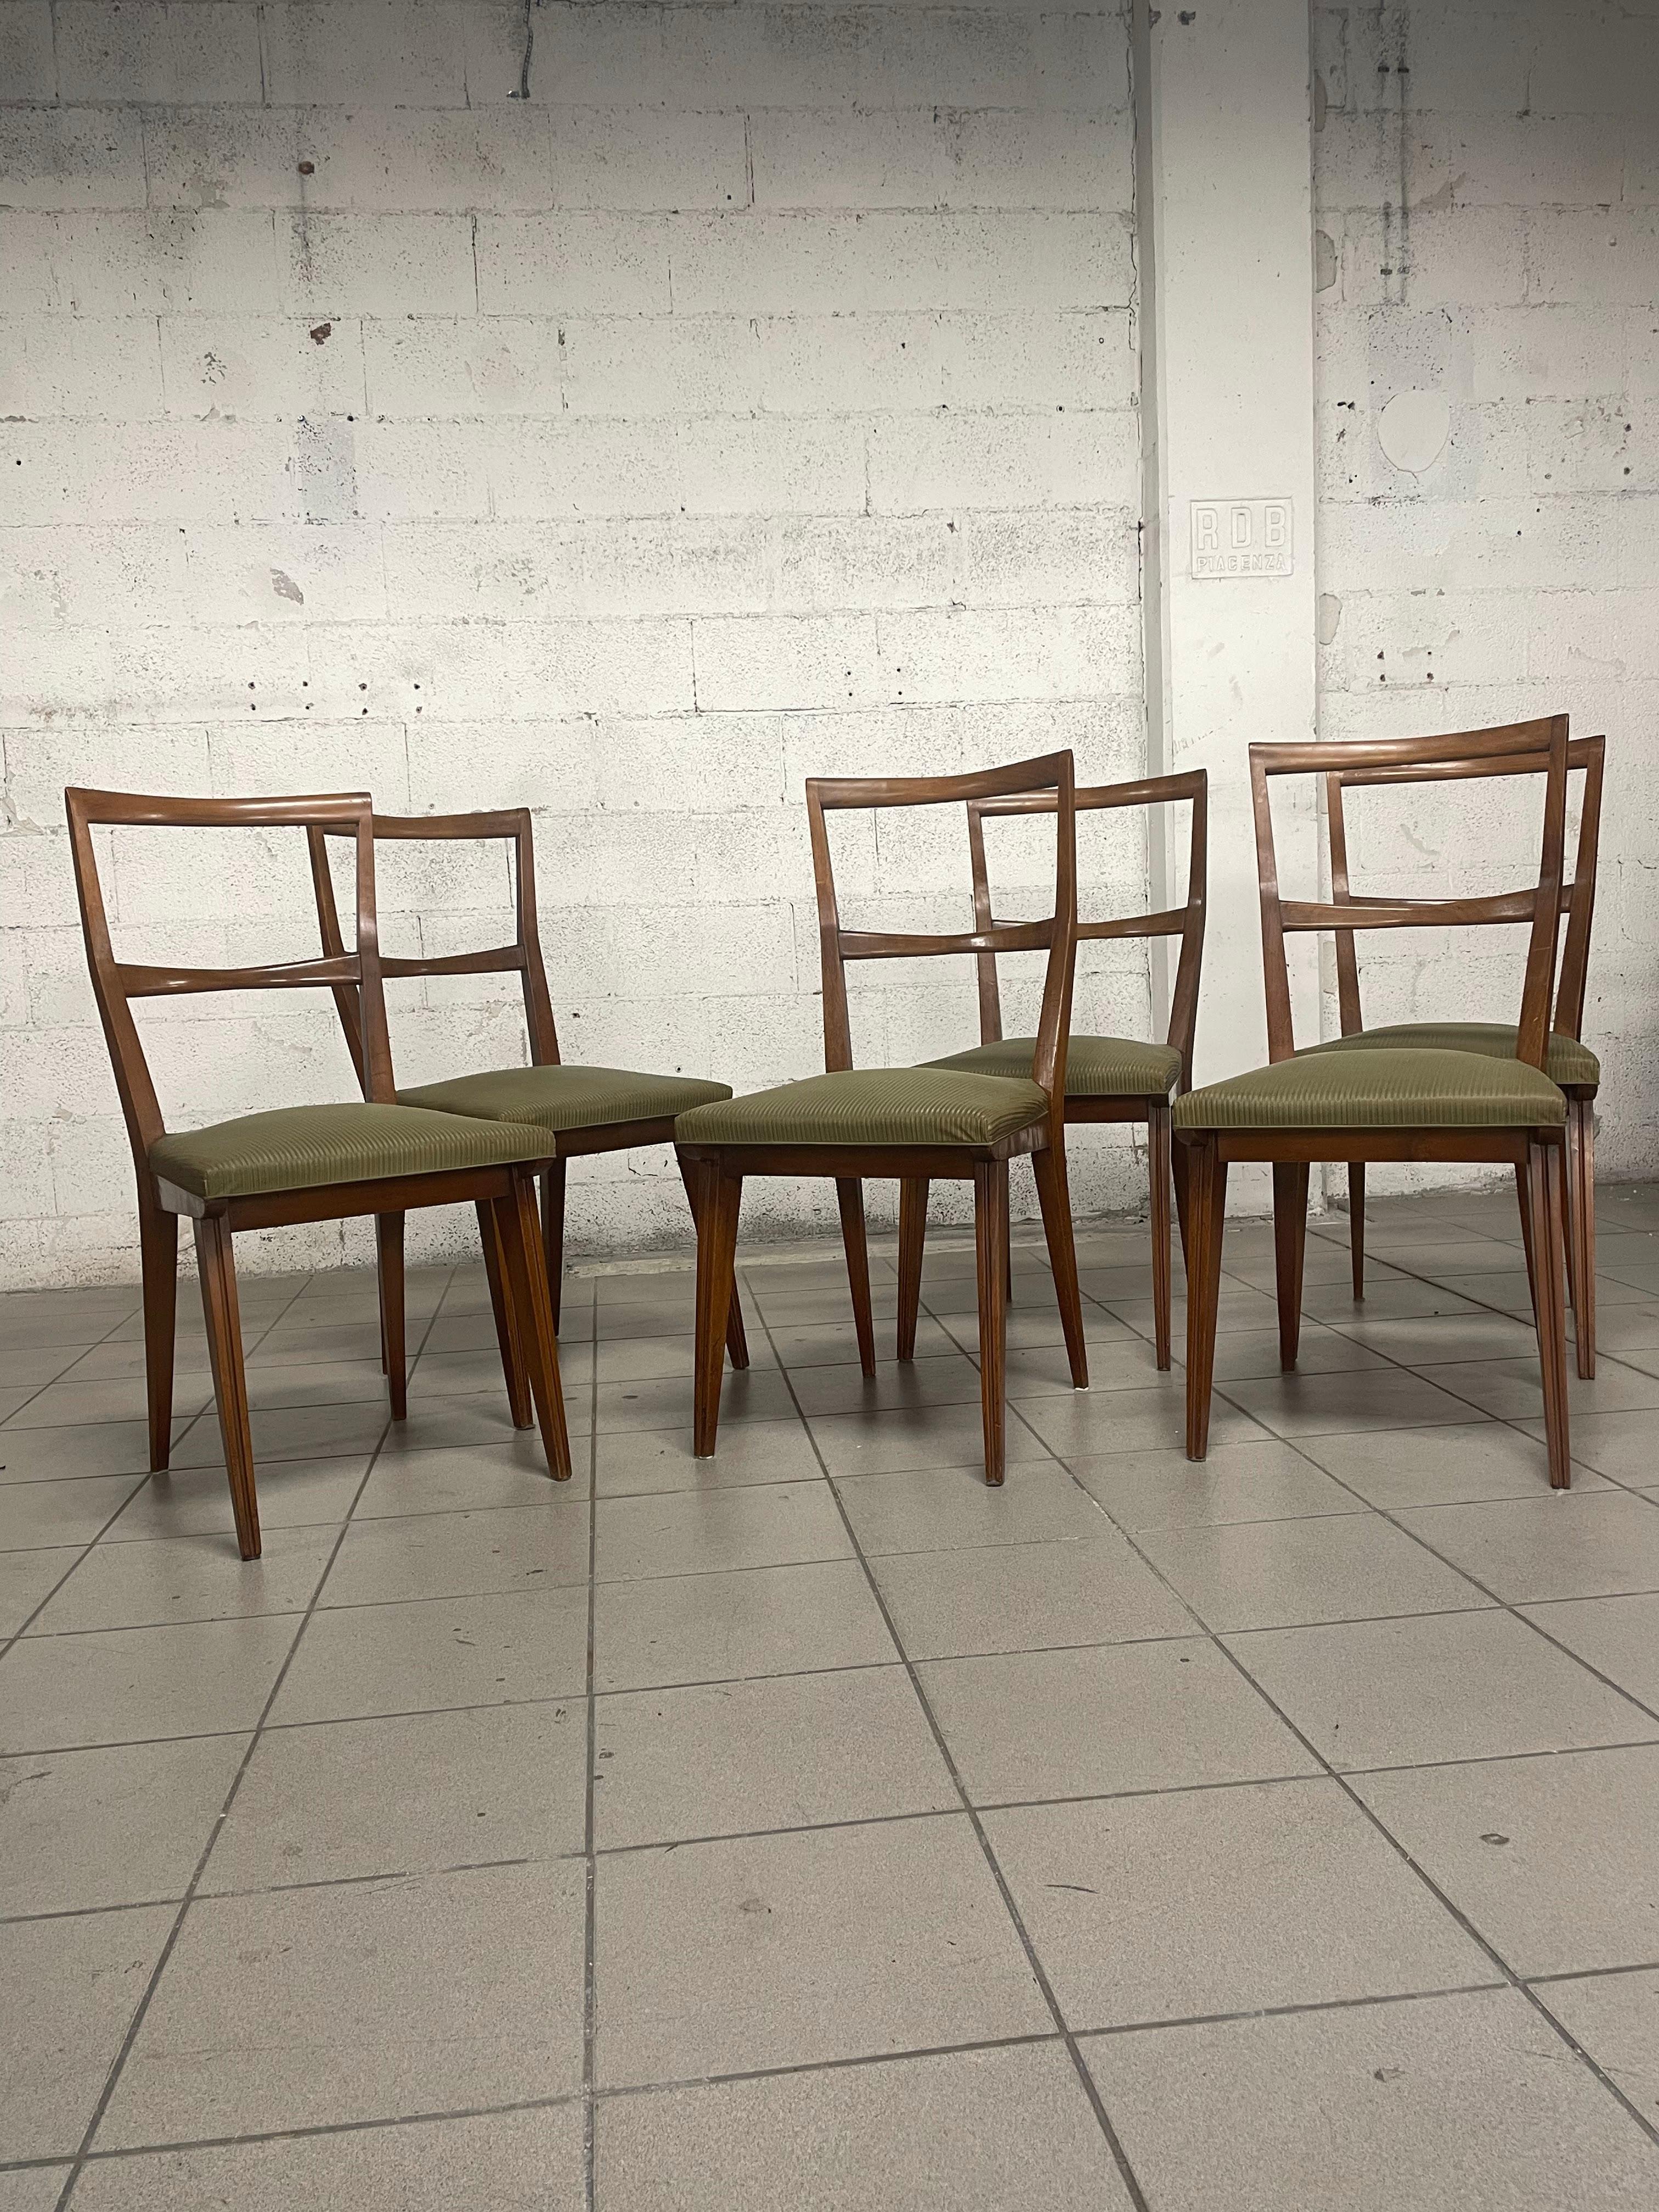 Set of 6 chairs from the 1960s with walnut frame and seat upholstered in green sky, a classic color of that period.

The backrest is slightly curved

The set has not been restored but is in good vintage condition.